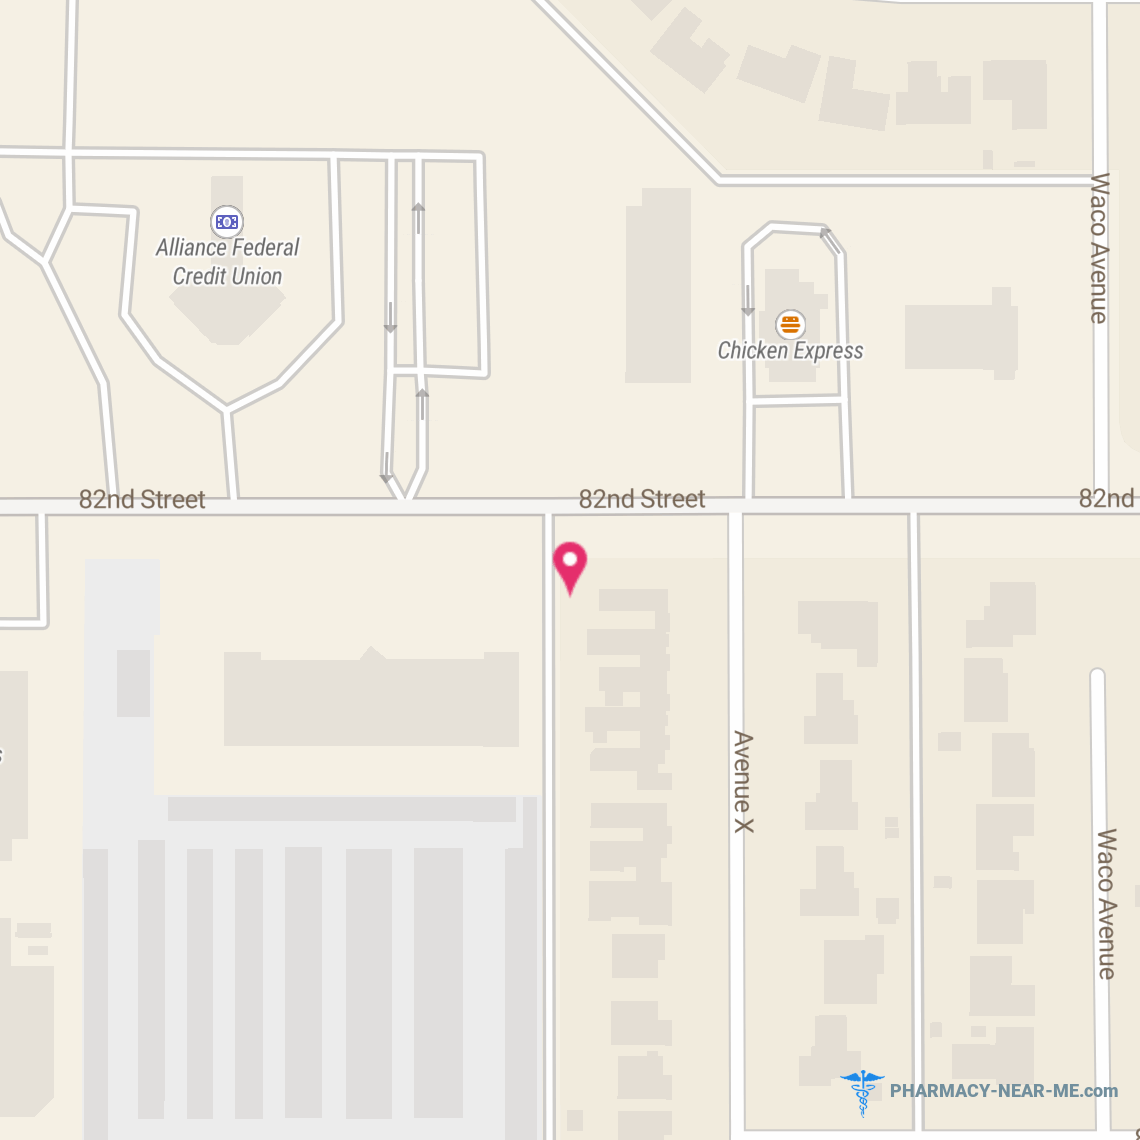 WALGREENS #05996 - Pharmacy Hours, Phone, Reviews & Information: 2417 82nd Street, Lubbock, Texas 79423, United States